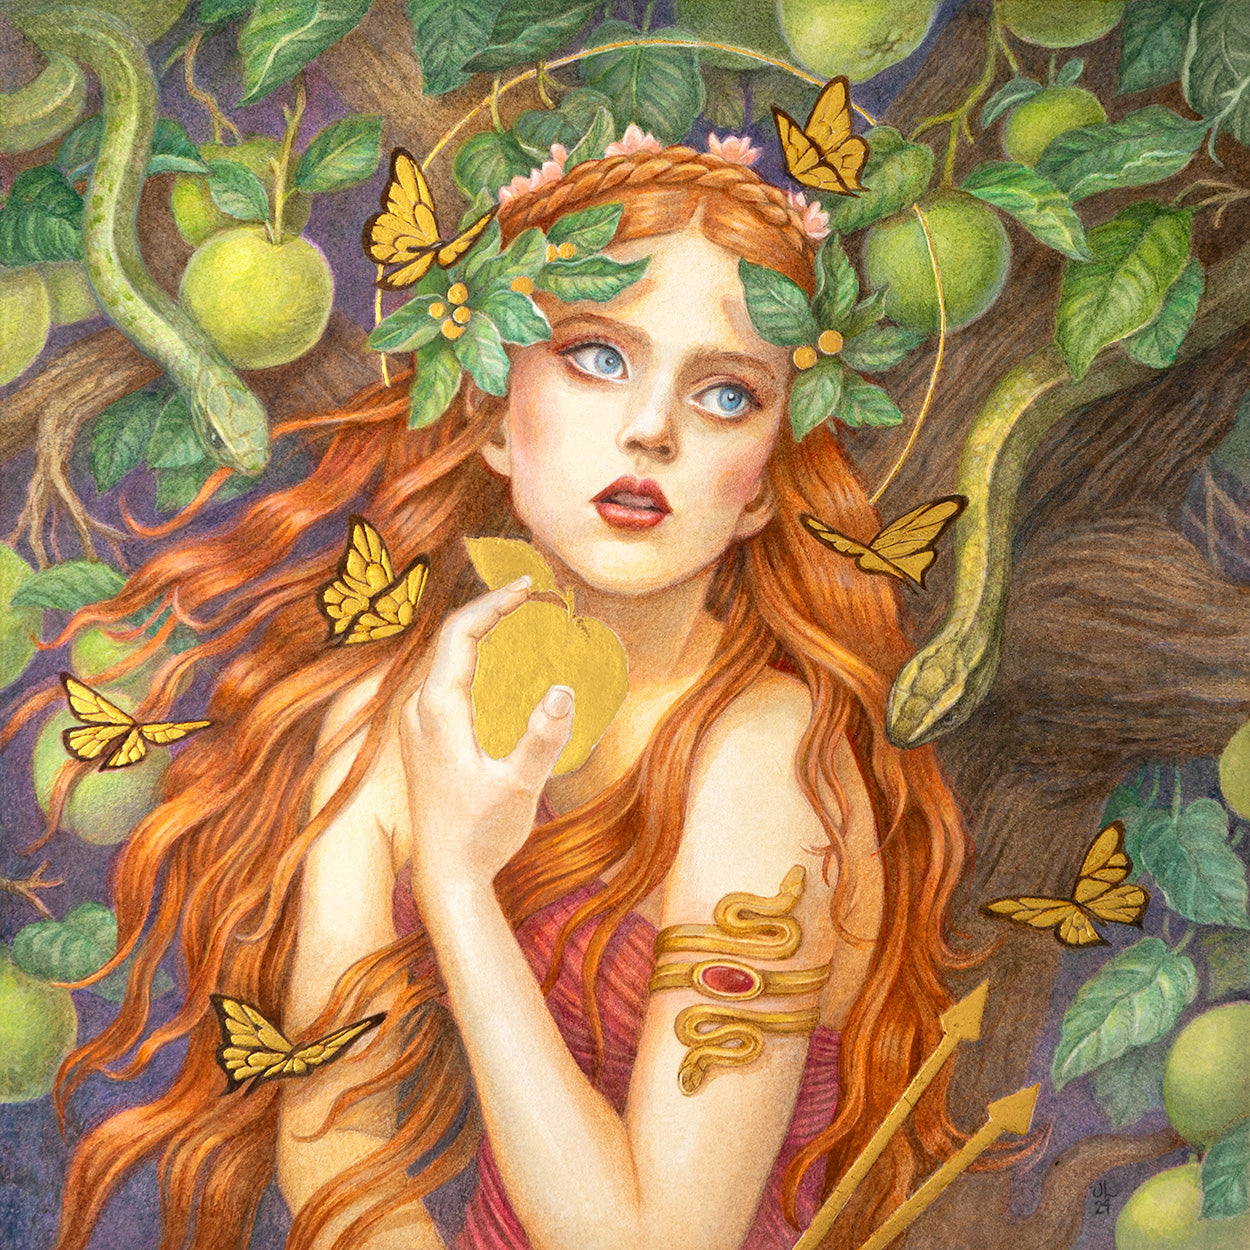 Aphrodite and the Golden Apple